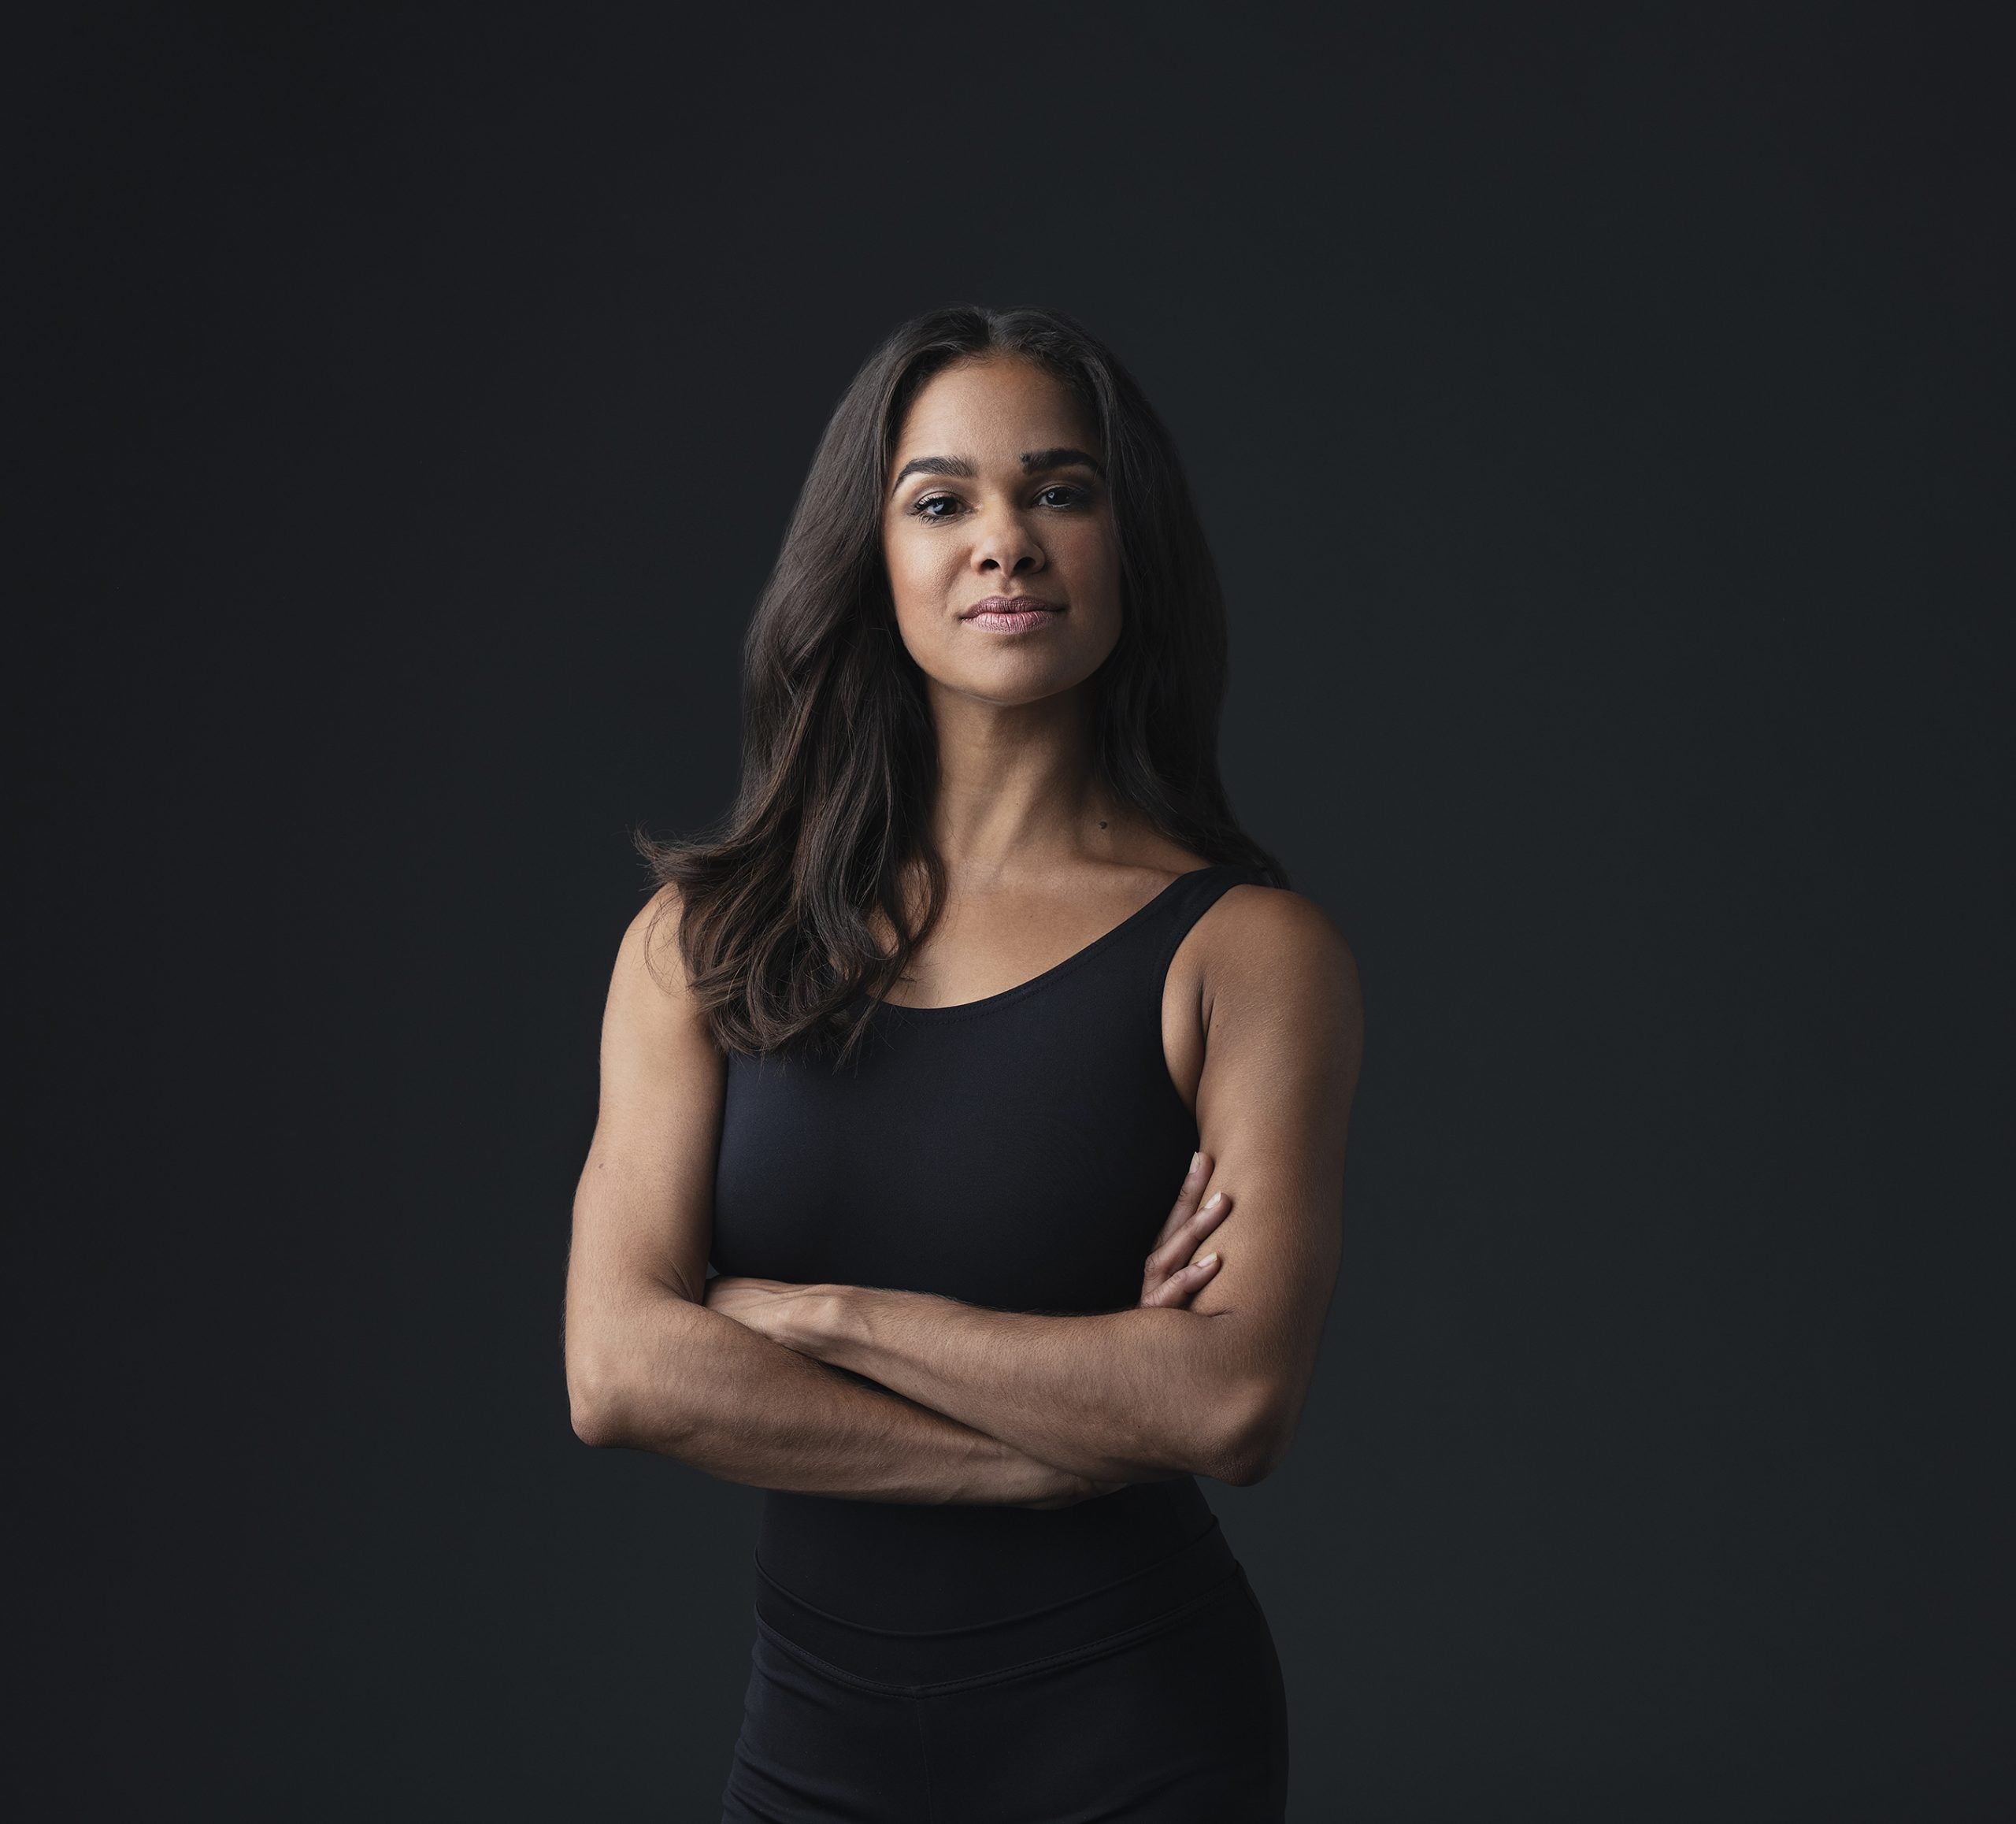 Misty Copeland Honors Black Ballerinas In New Children’s Book ‘My Journey To Our Legacy’